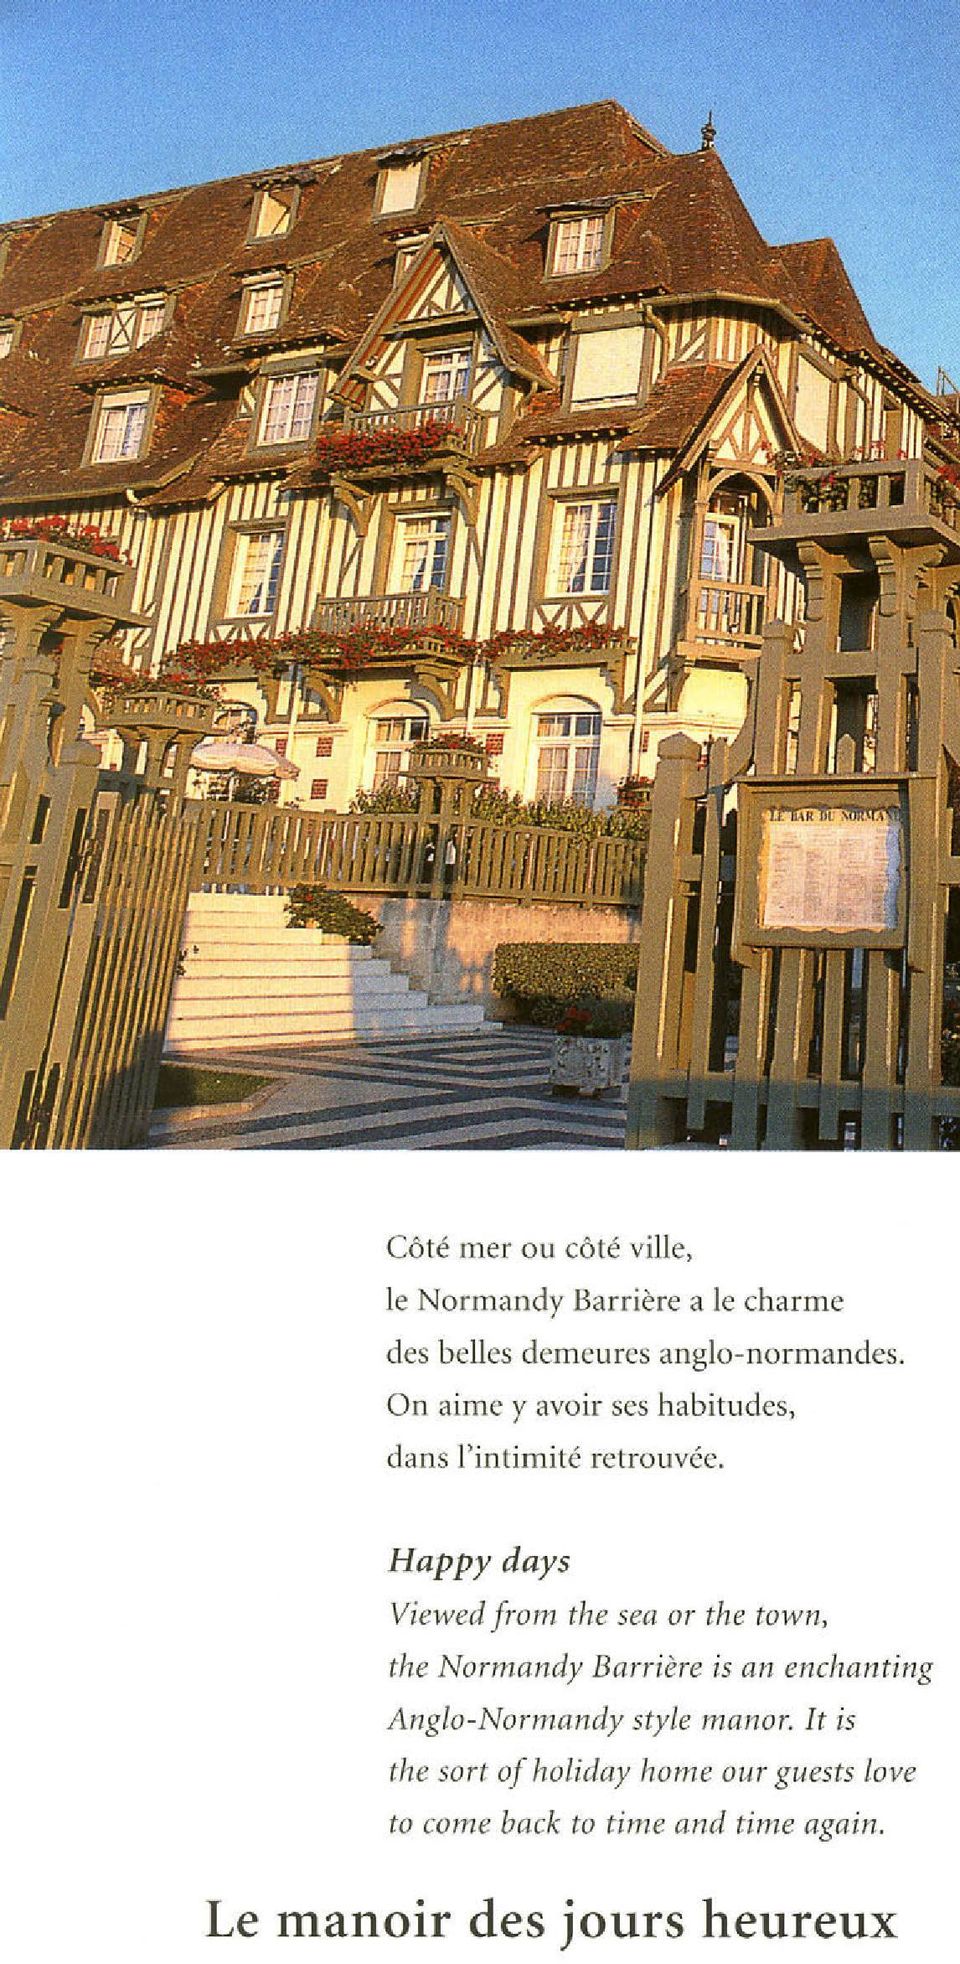 Happy days Viewed from the sea or the town, the Normandy Barrière is an enchanting